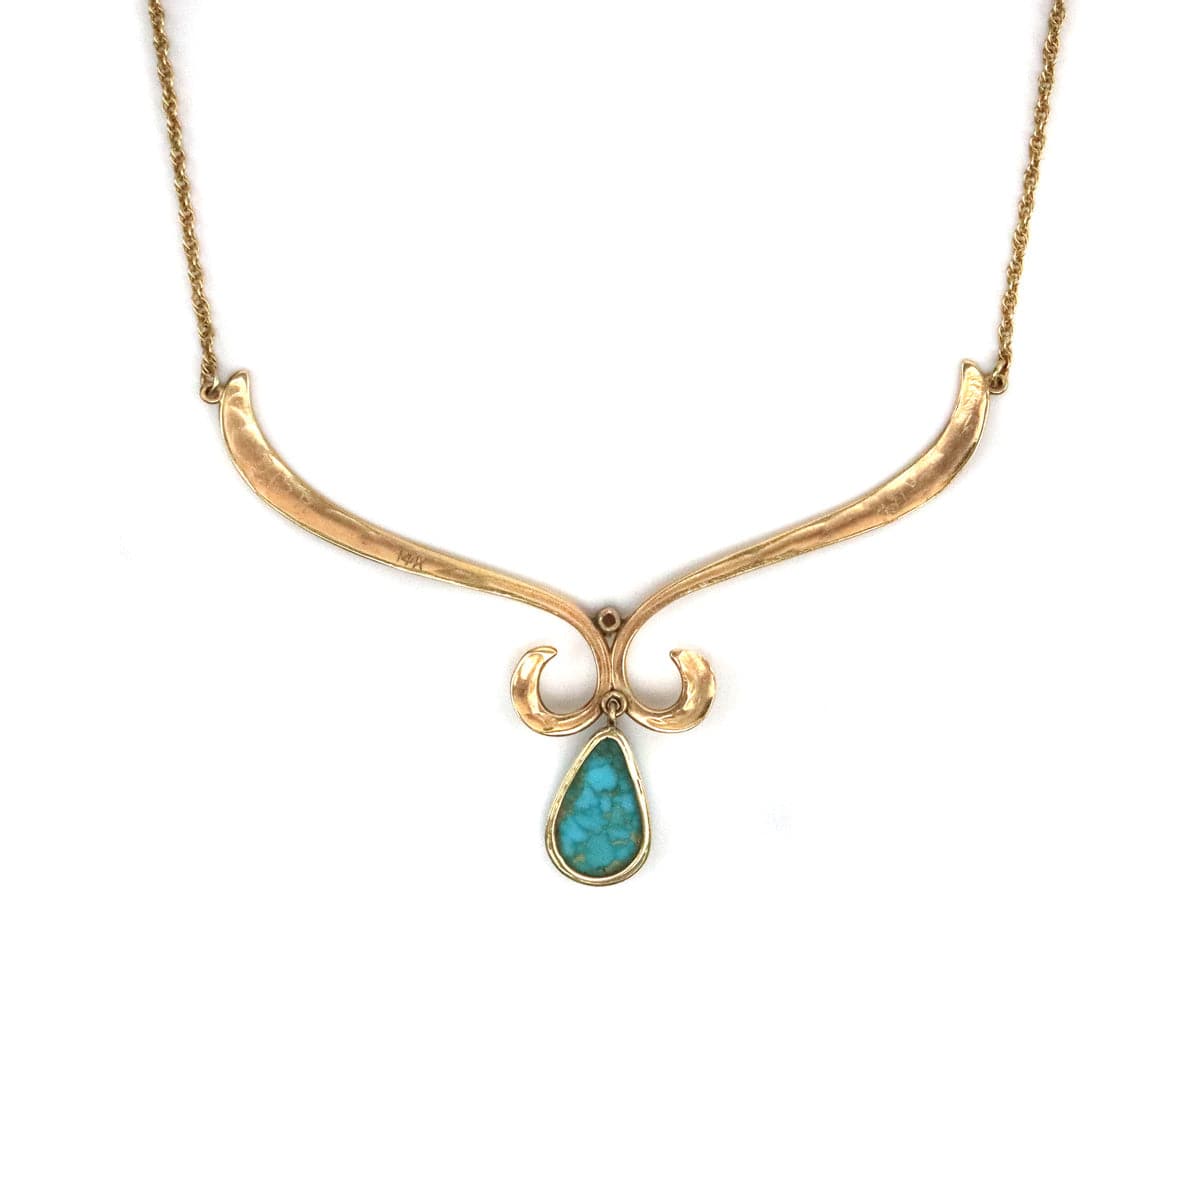 Frank Patania Jr. - Turquoise and 14K Gold Necklace, 16" length (J91699-1222-026) 2